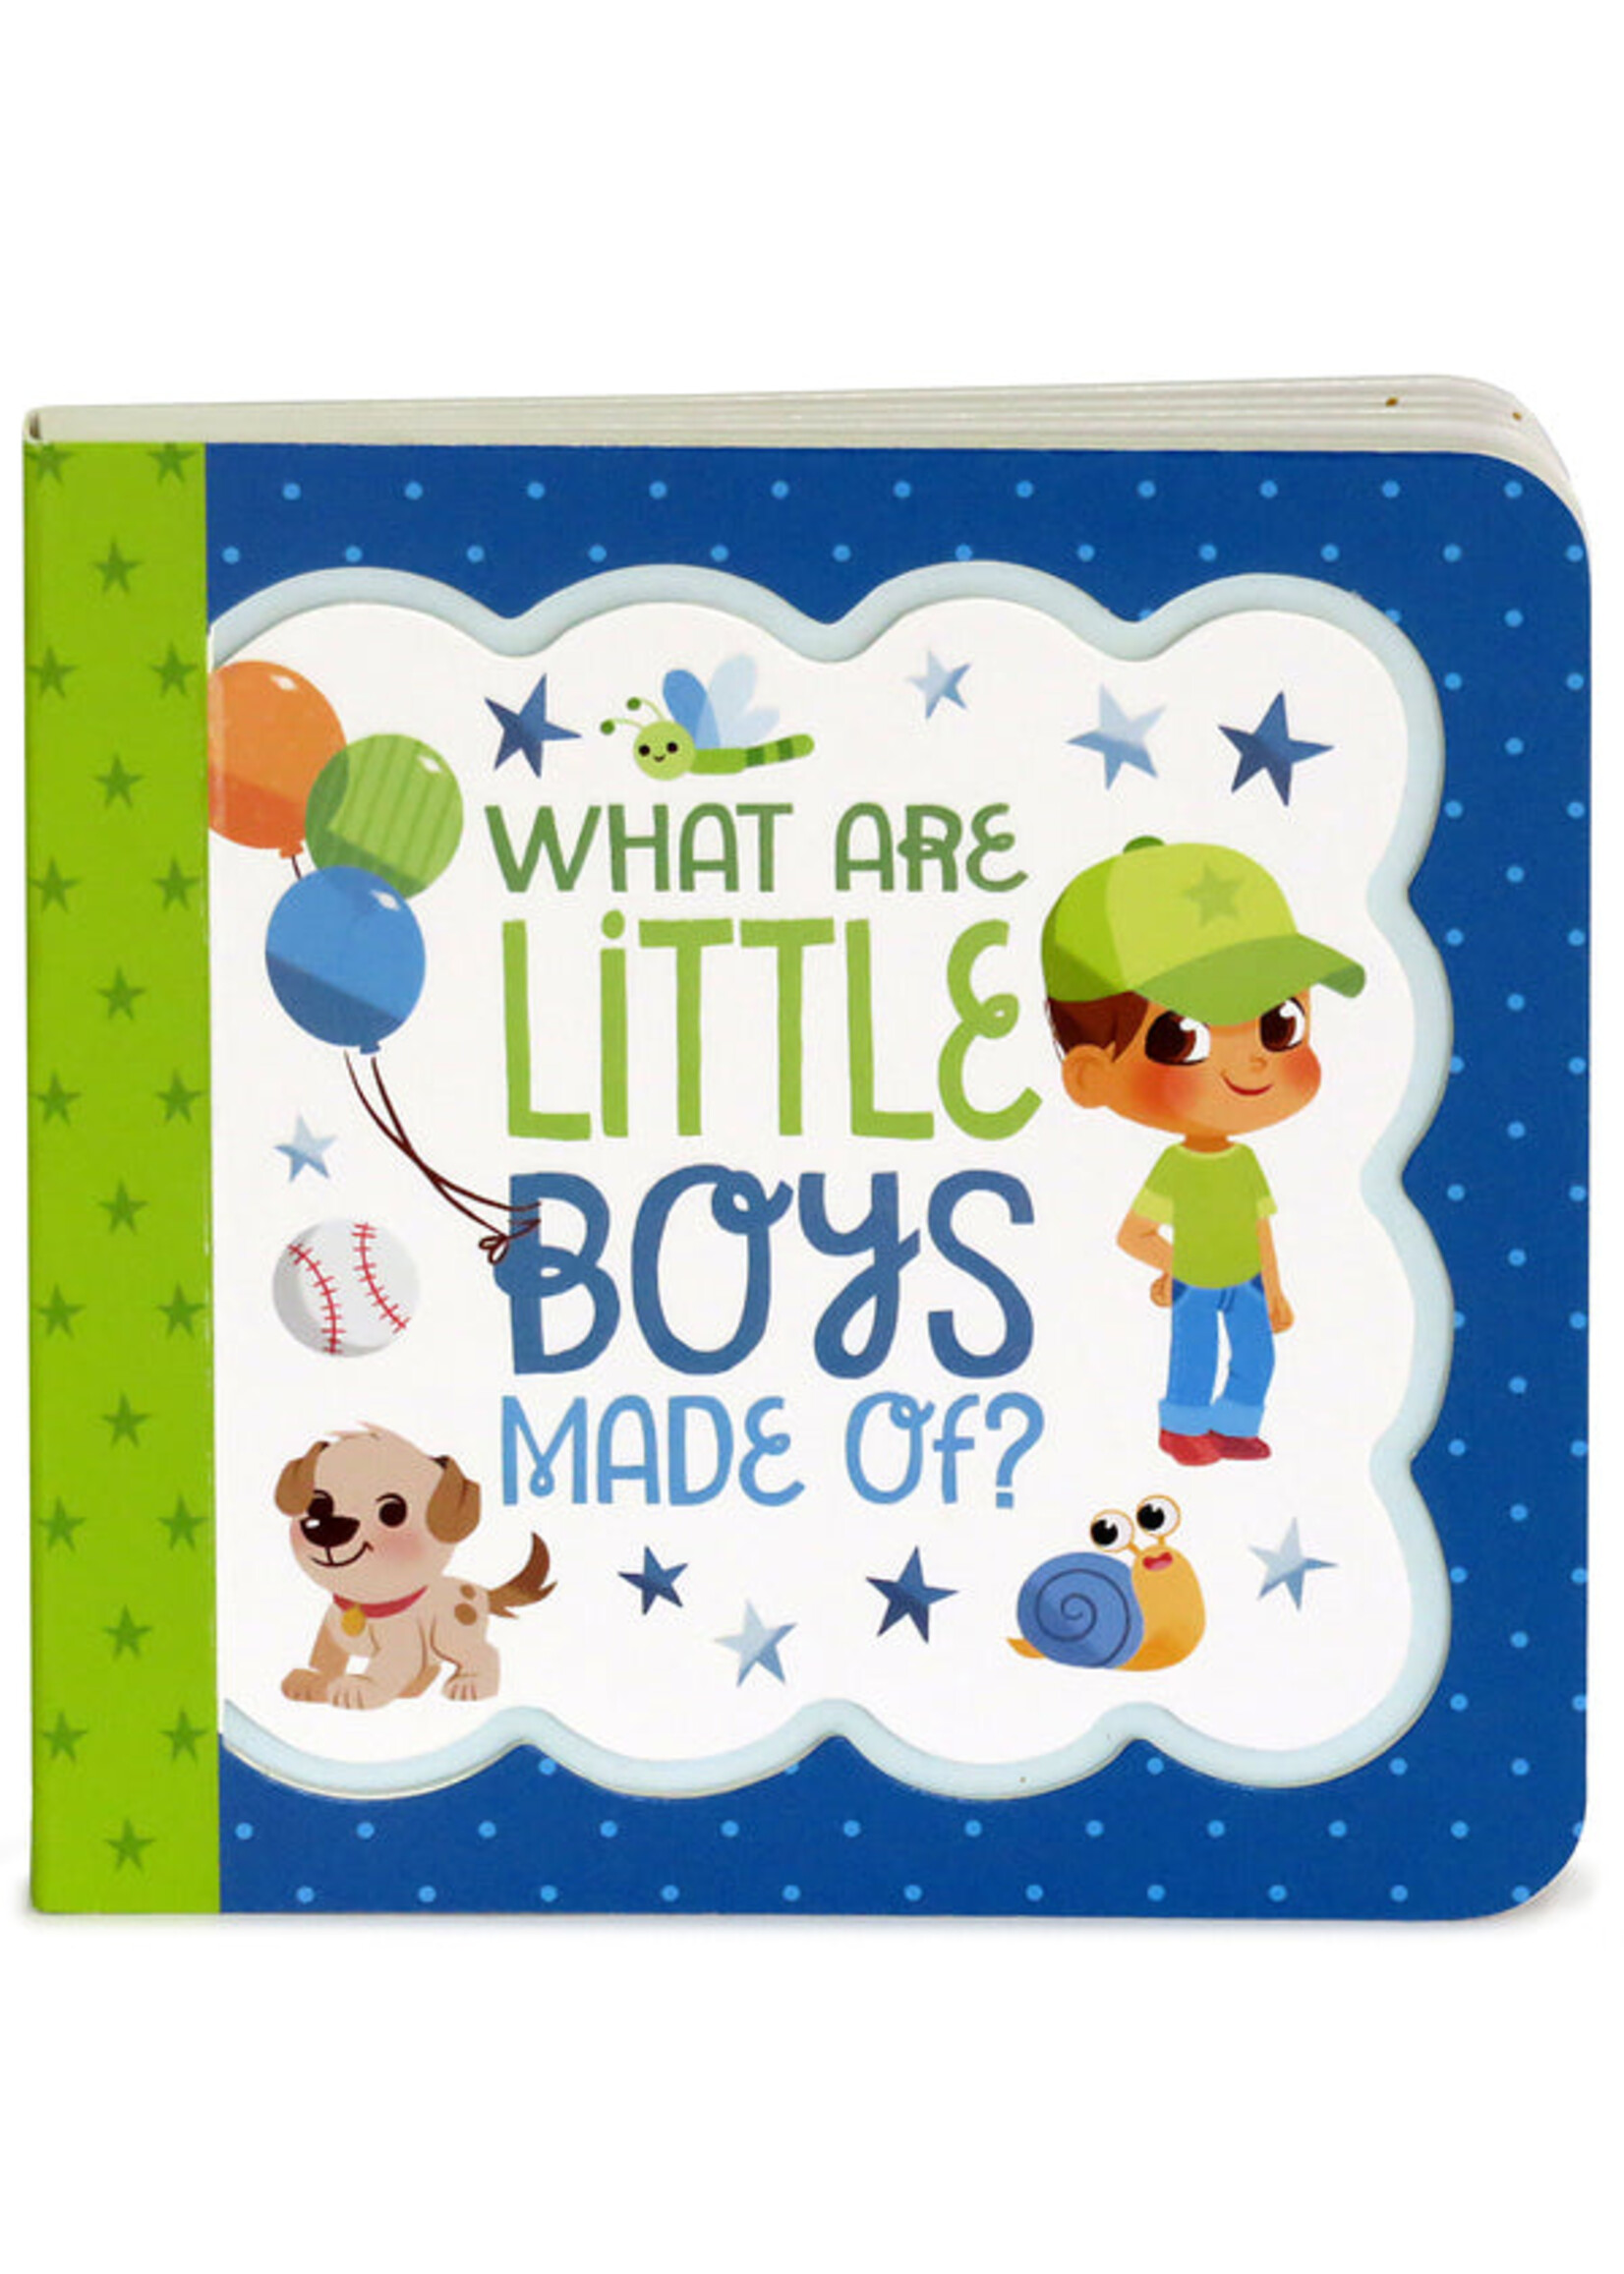 Cottage Door Press CDP Greeting Card Book Boys Made Of